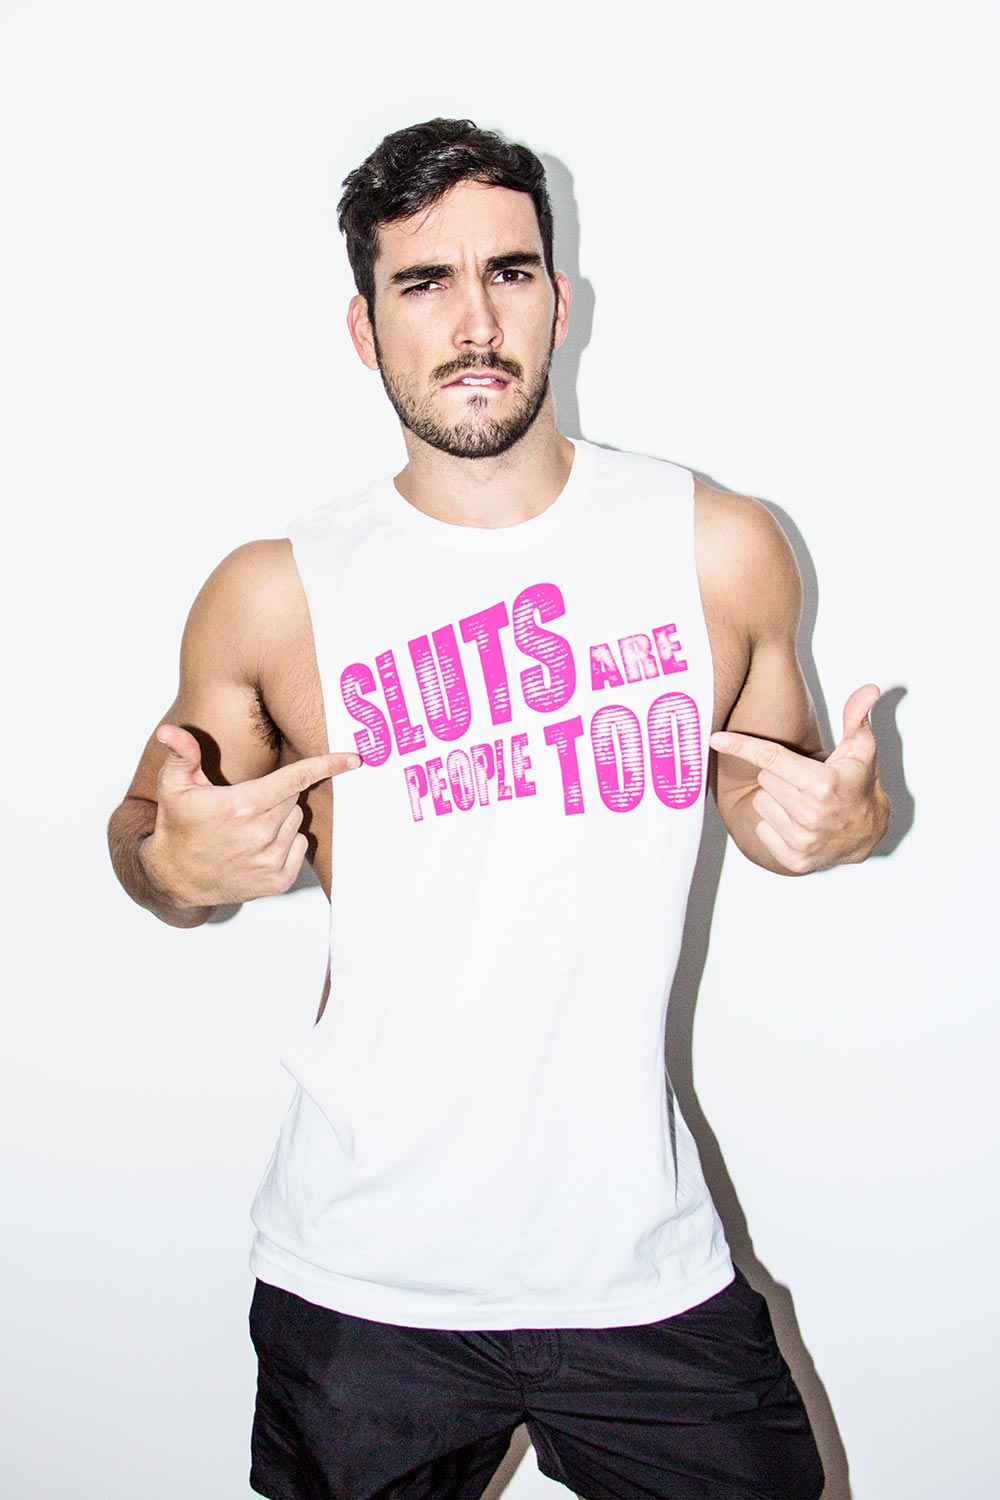 A Schwarzrosagold t-shirt with the slogan "Sluts are people too." (Photo: Schwarzrosagold)